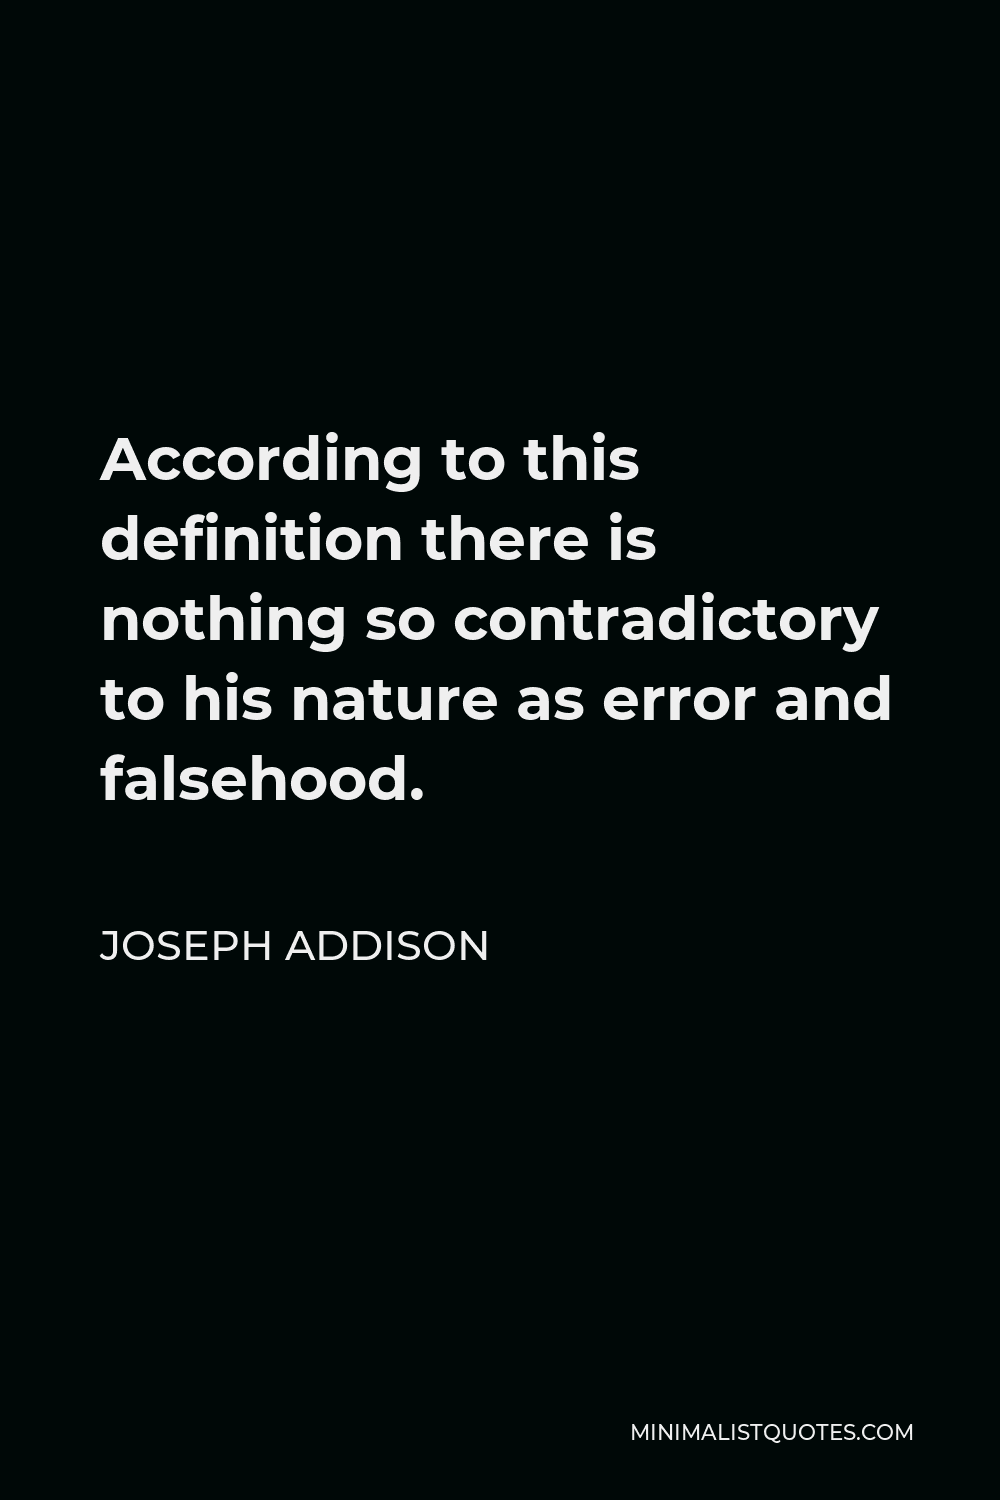 Joseph Addison Quote - According to this definition there is nothing so contradictory to his nature as error and falsehood.